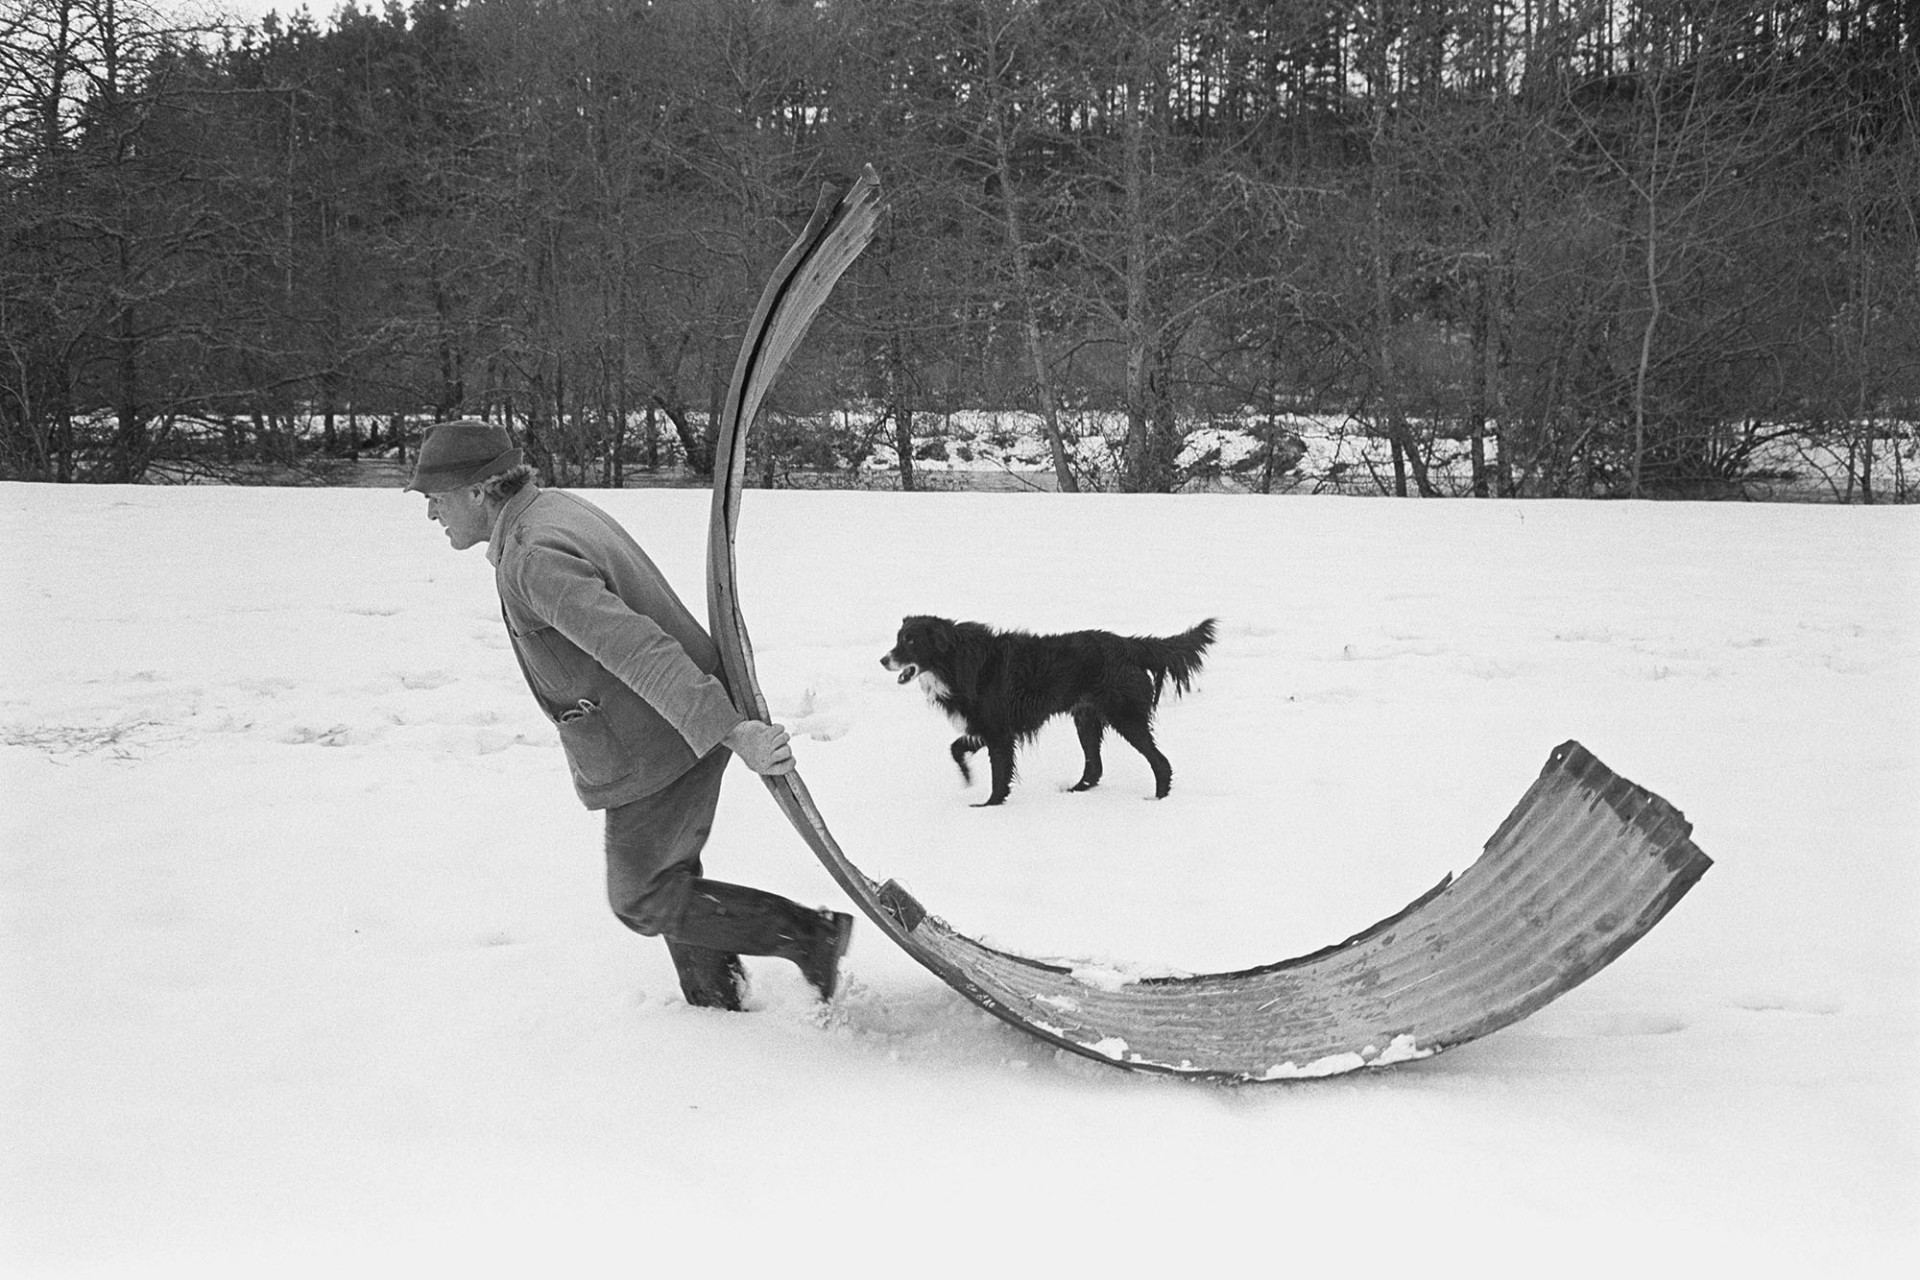 Snow, farmer moving shed in case of river flooding, dog. 
[Alf Pugsley moving a corrugated iron shed in a snow covered field at Lower Langham, Dolton, to avoid flooding. A dog is with him and the river Torridge is visible in the background.]